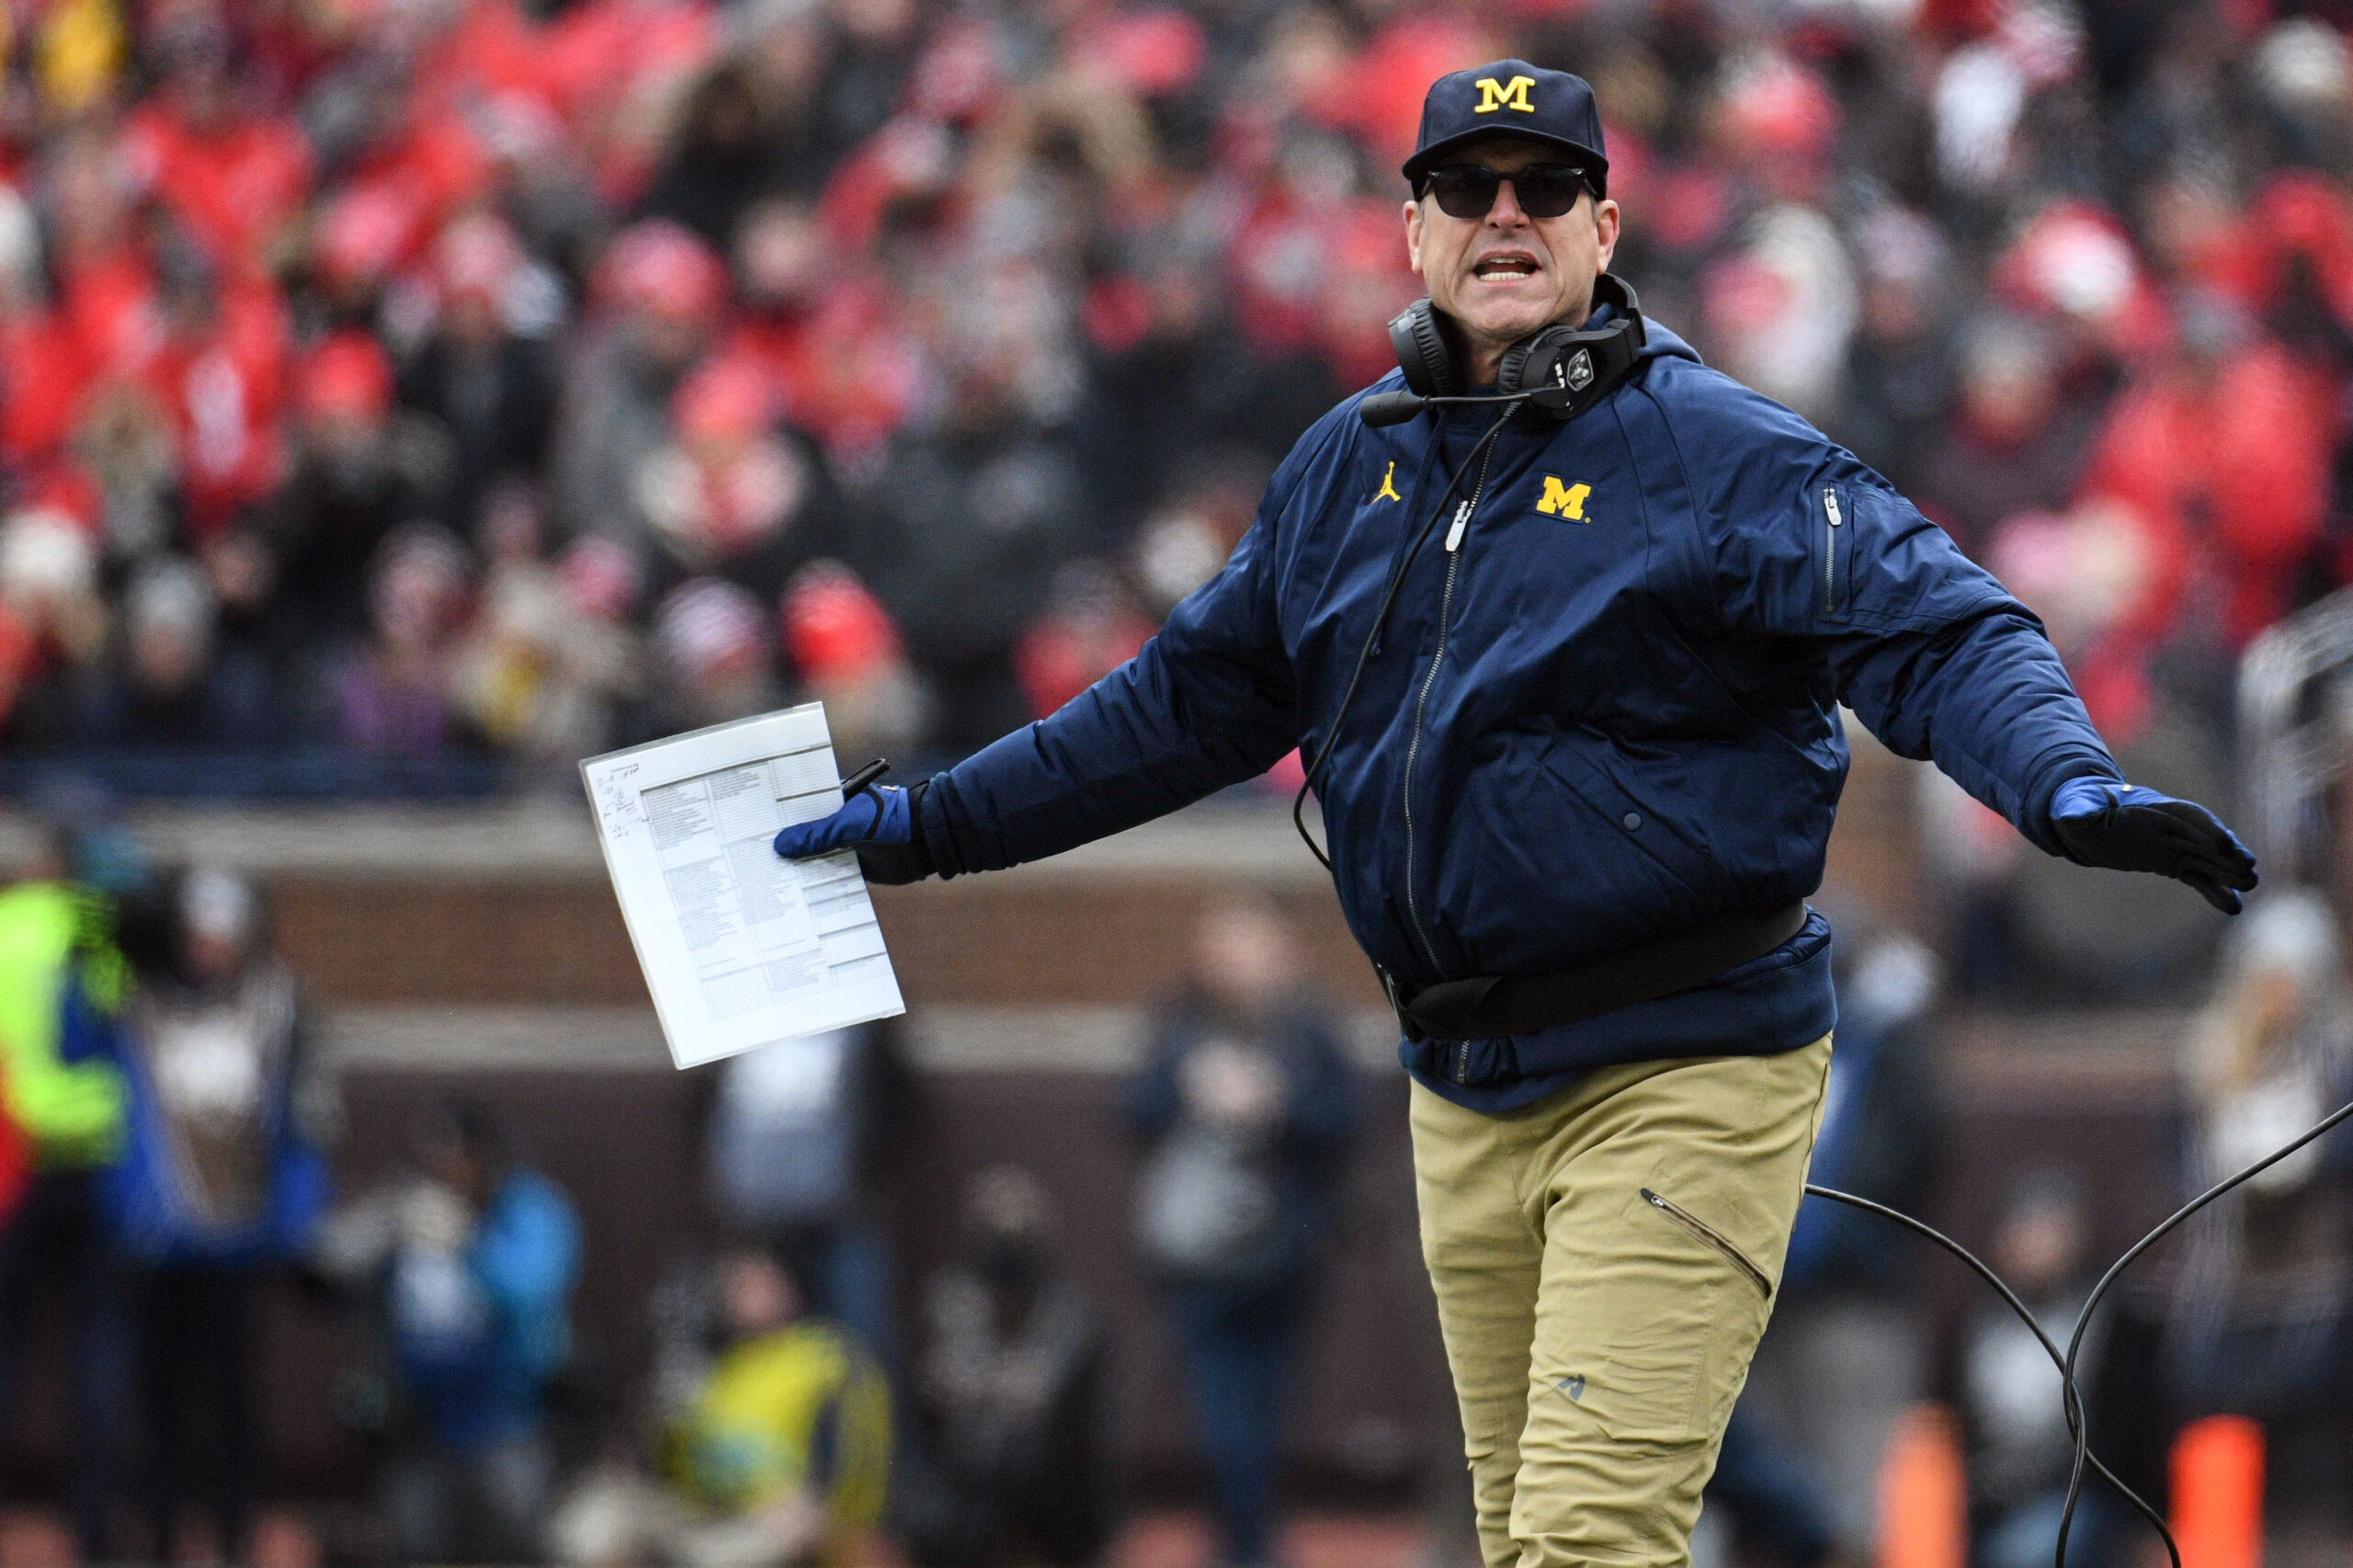 Michigan football recruiting is trending for Ohio offensive lineman